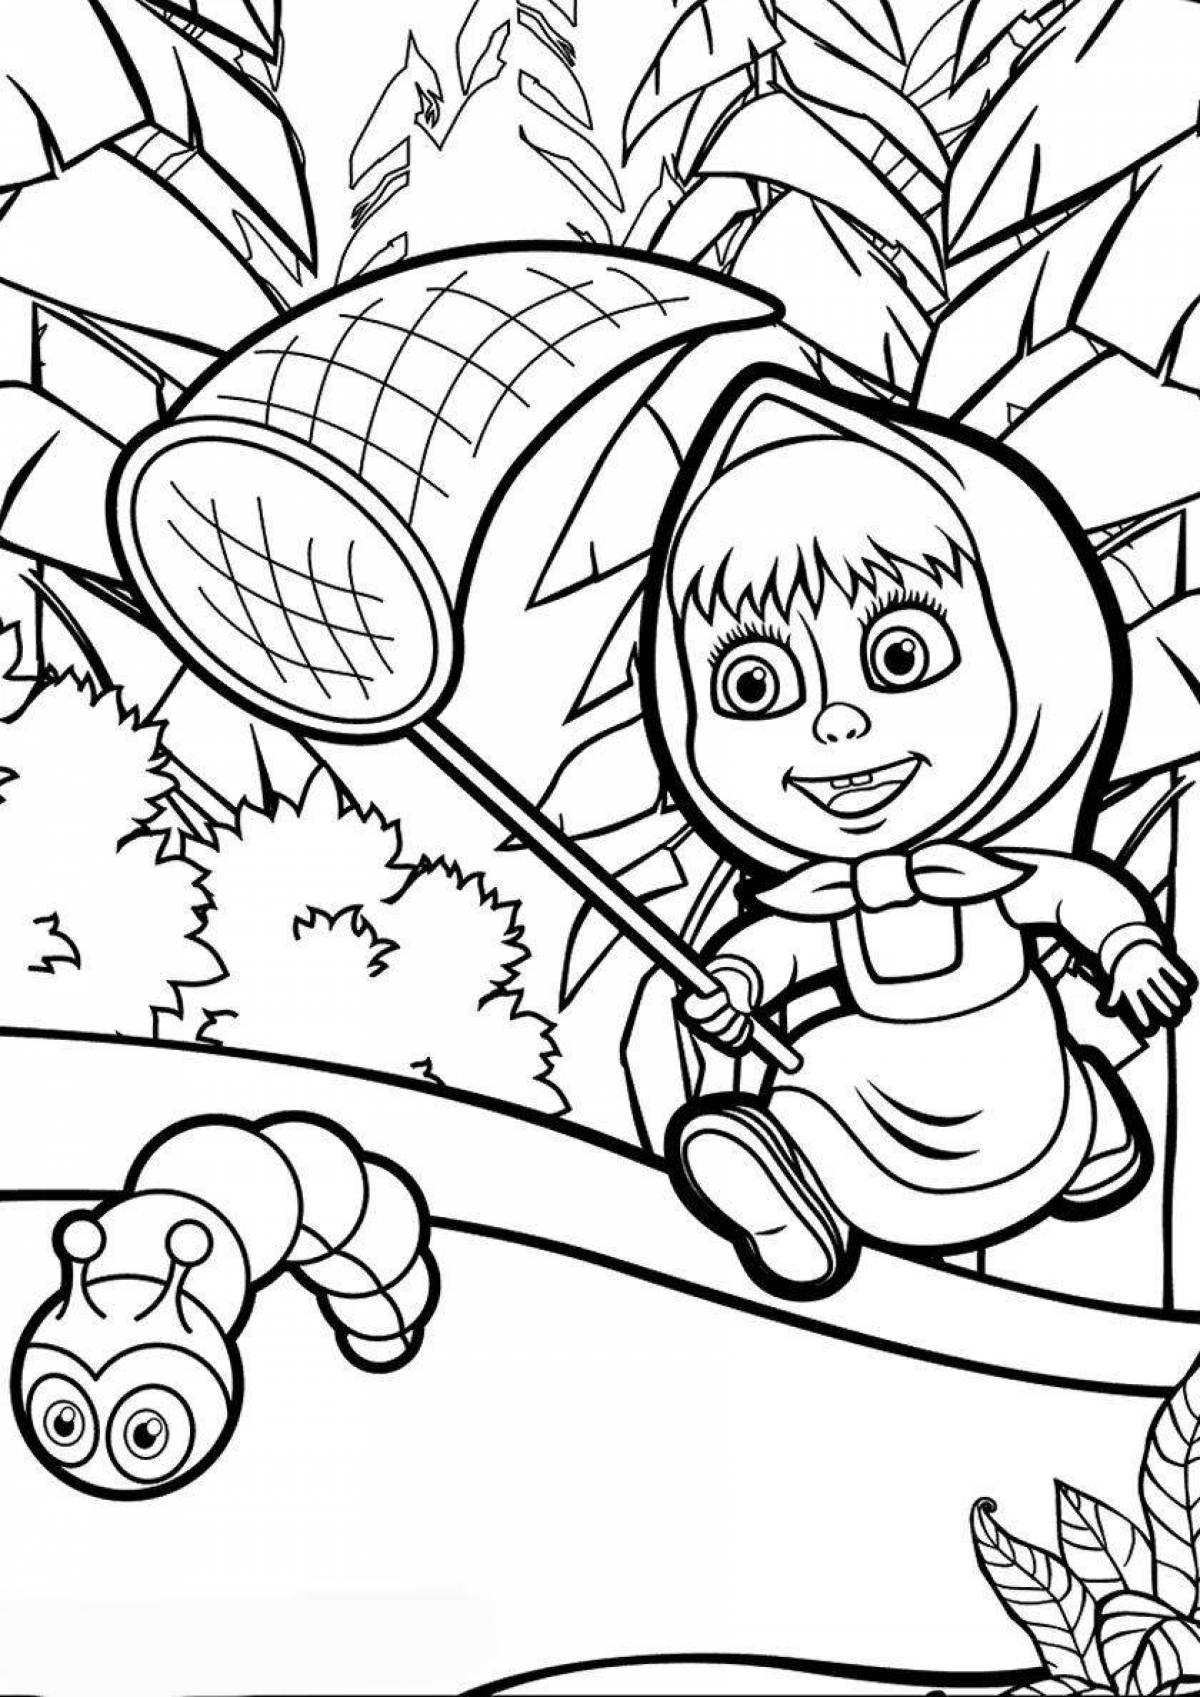 Coloring nice masha and the bear deluxe